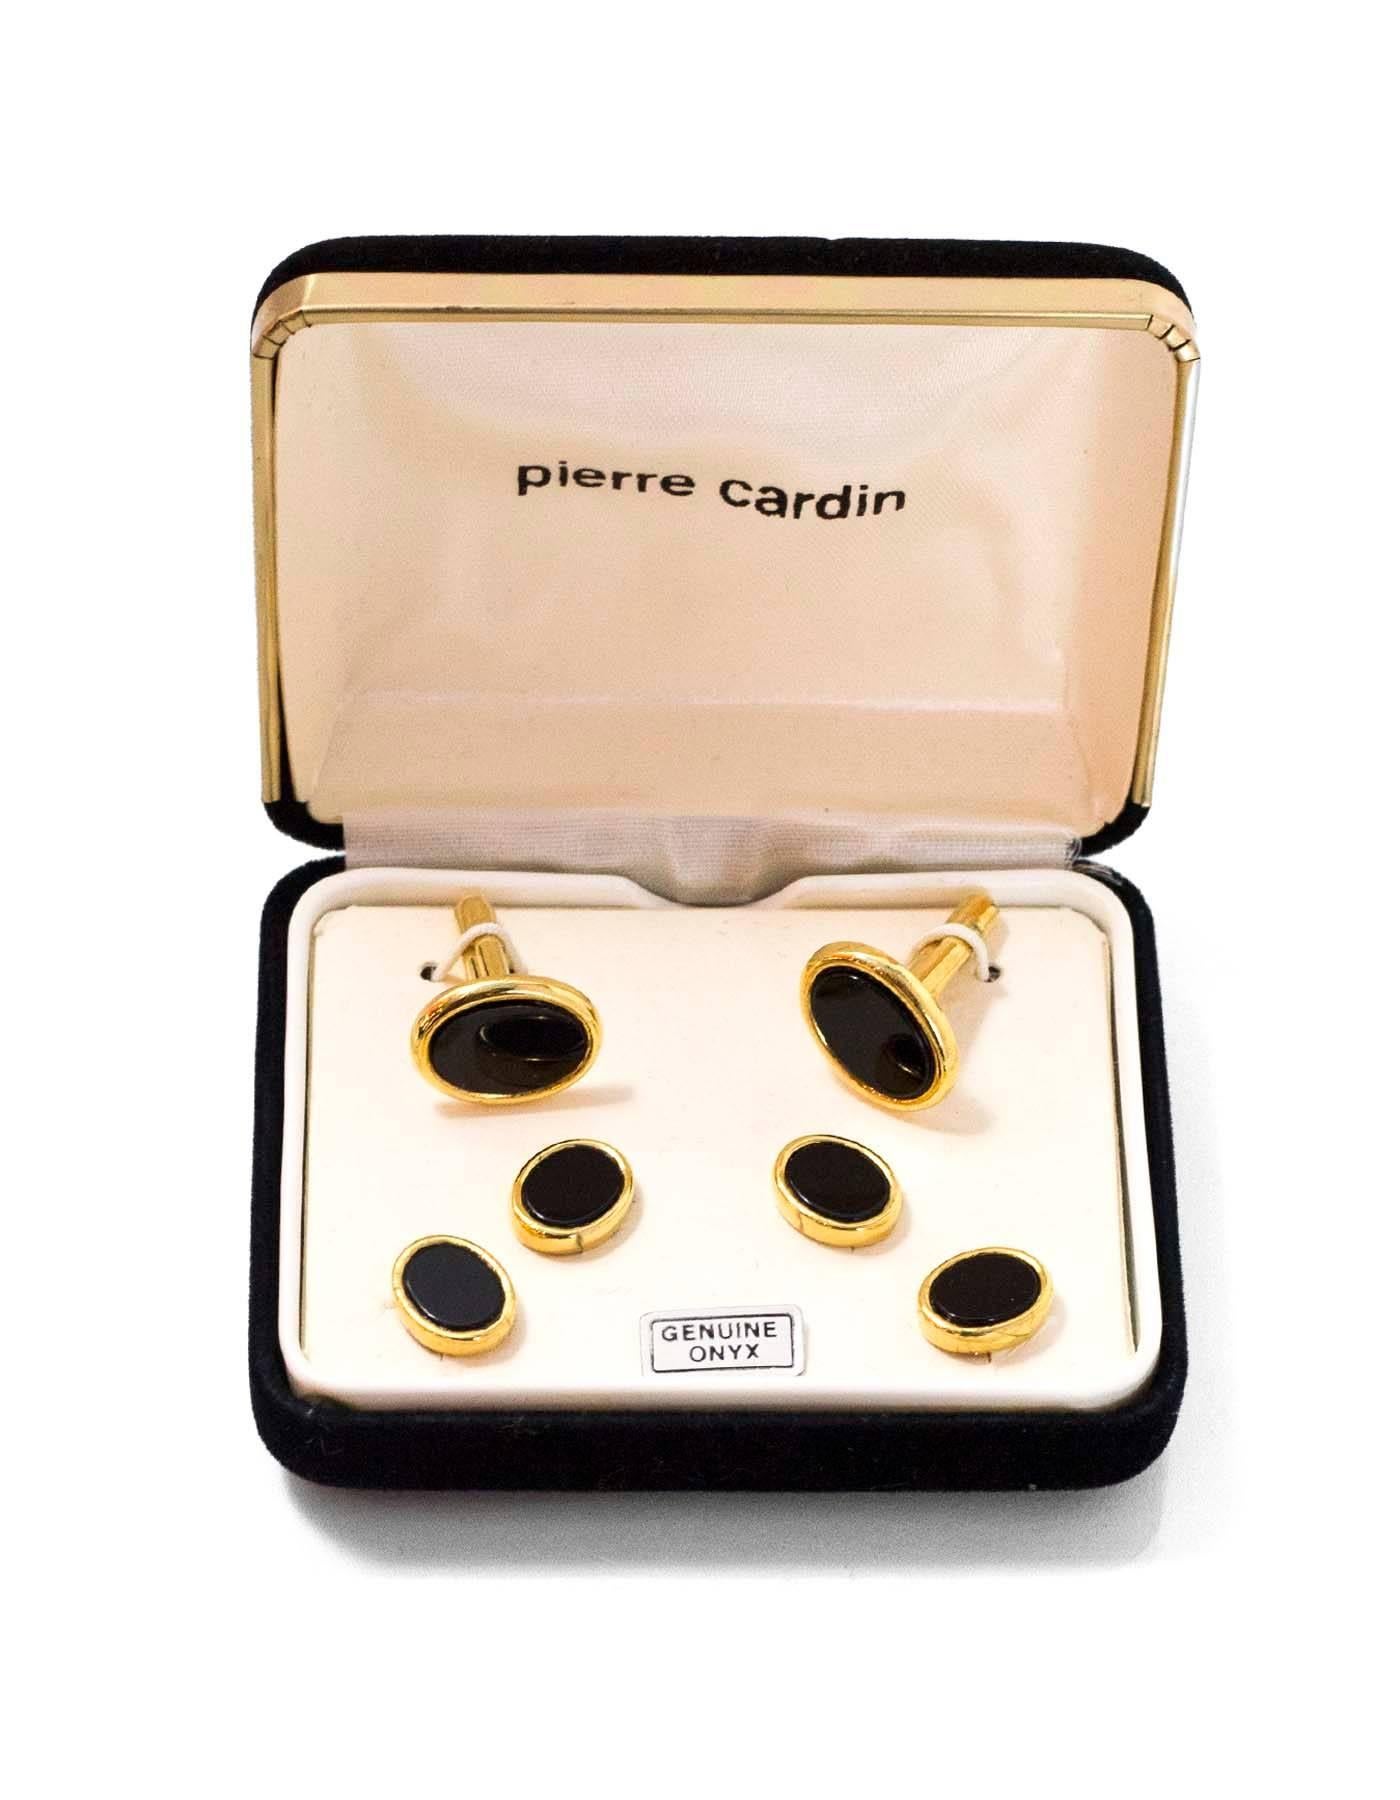 Pierre Cardin Black Onyx & Goldtone Tuxedo Set with Case In Excellent Condition In New York, NY